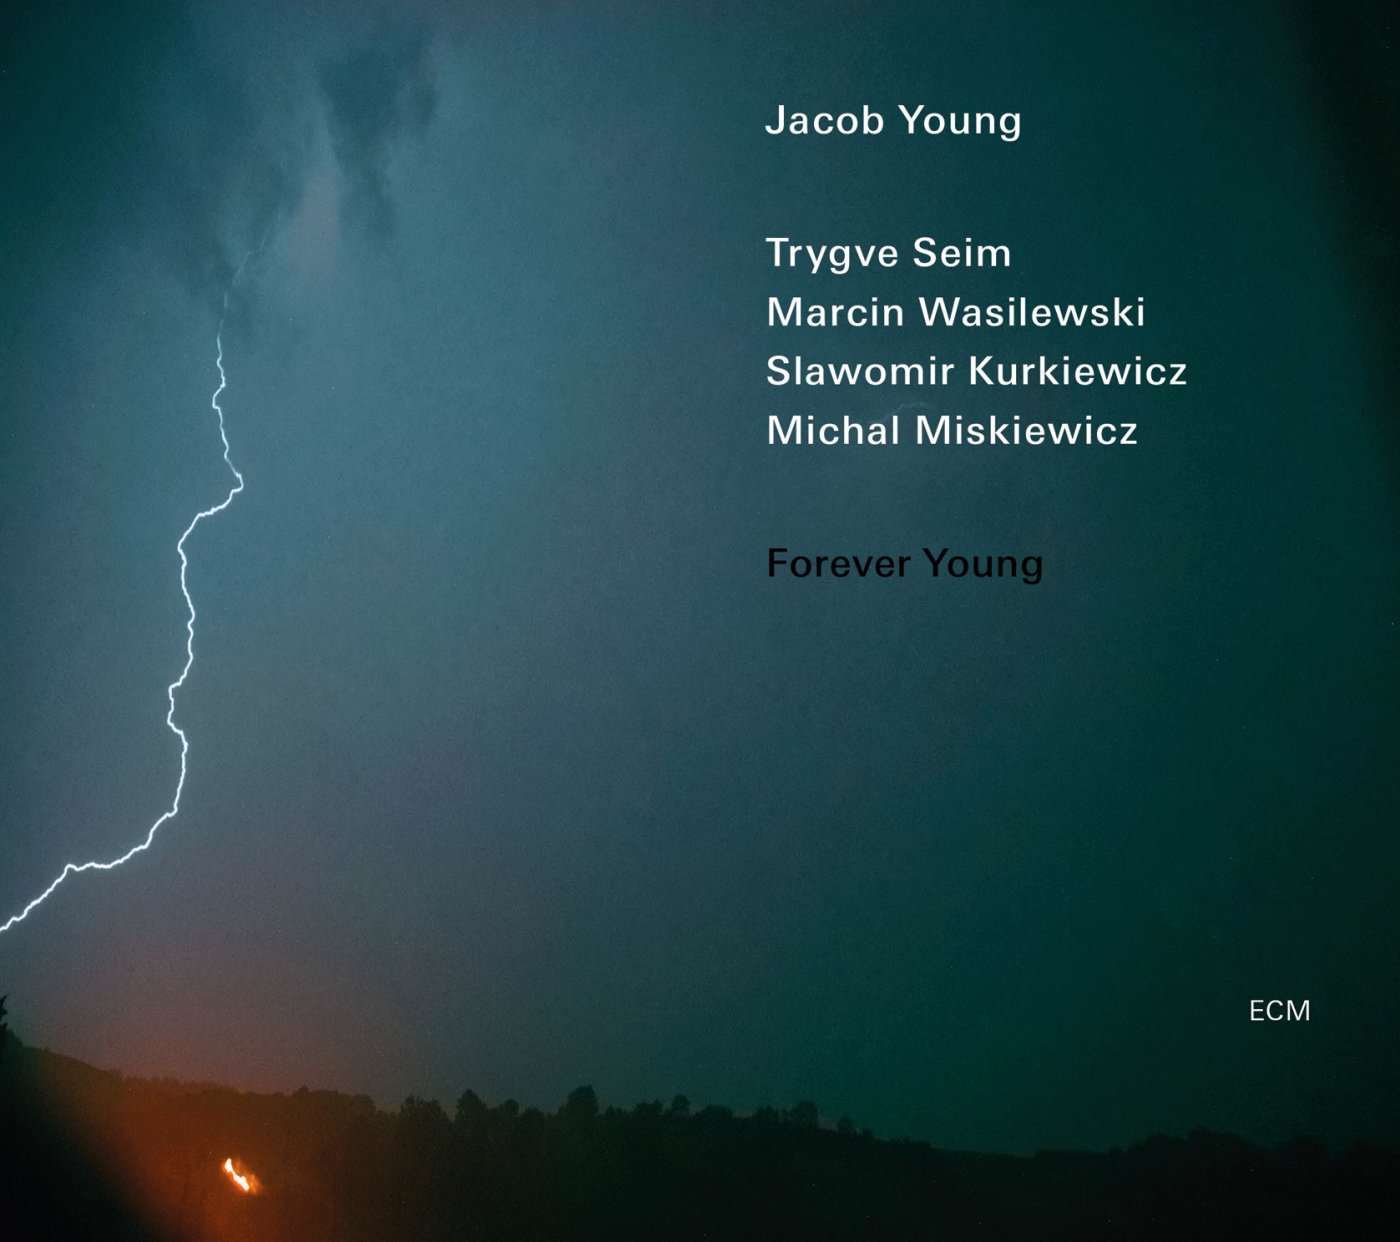 Jacob Young - Forever Young